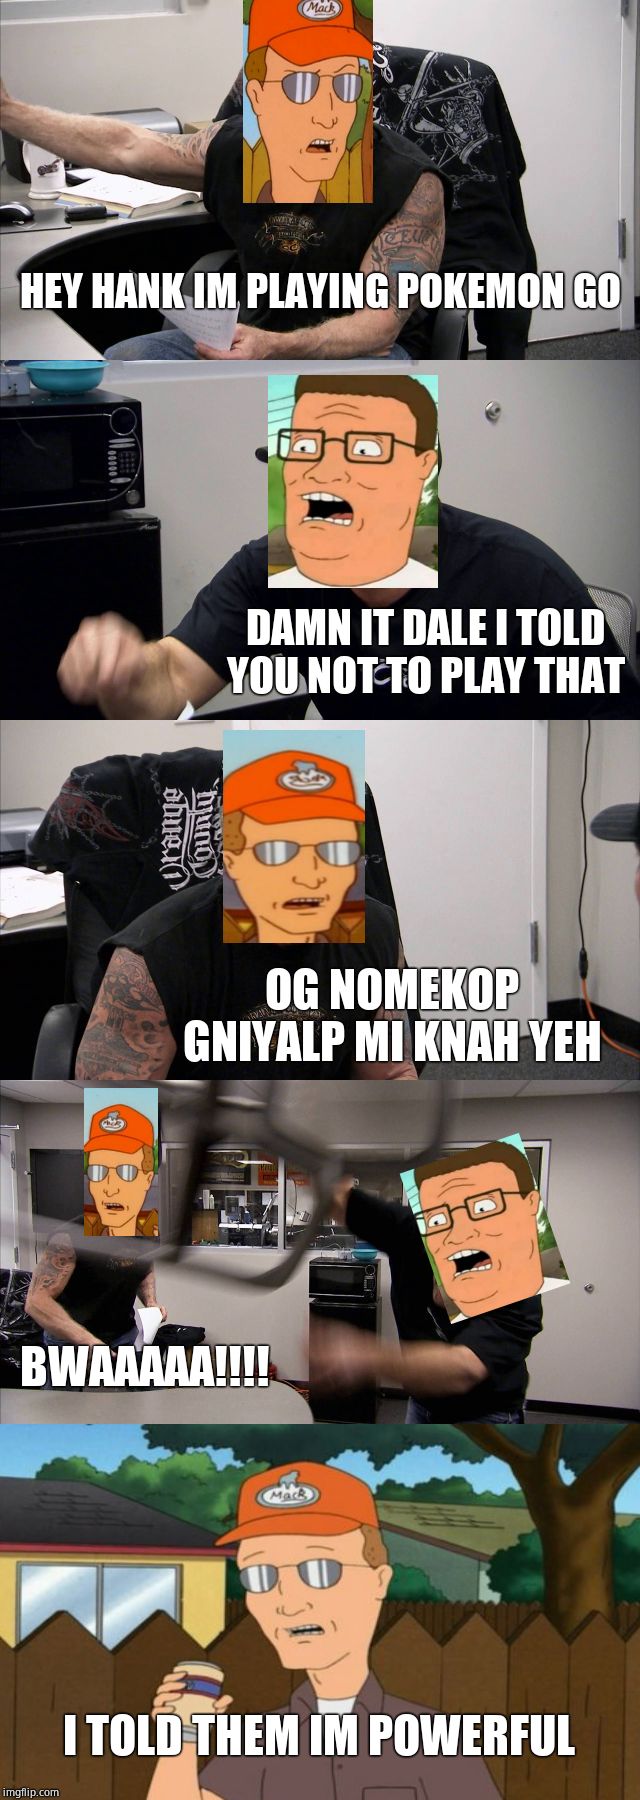 American Chopper Argument Meme | HEY HANK IM PLAYING POKEMON GO; DAMN IT DALE I TOLD YOU NOT TO PLAY THAT; OG NOMEKOP GNIYALP MI KNAH YEH; BWAAAAA!!!! I TOLD THEM IM POWERFUL | image tagged in memes,american chopper argument | made w/ Imgflip meme maker